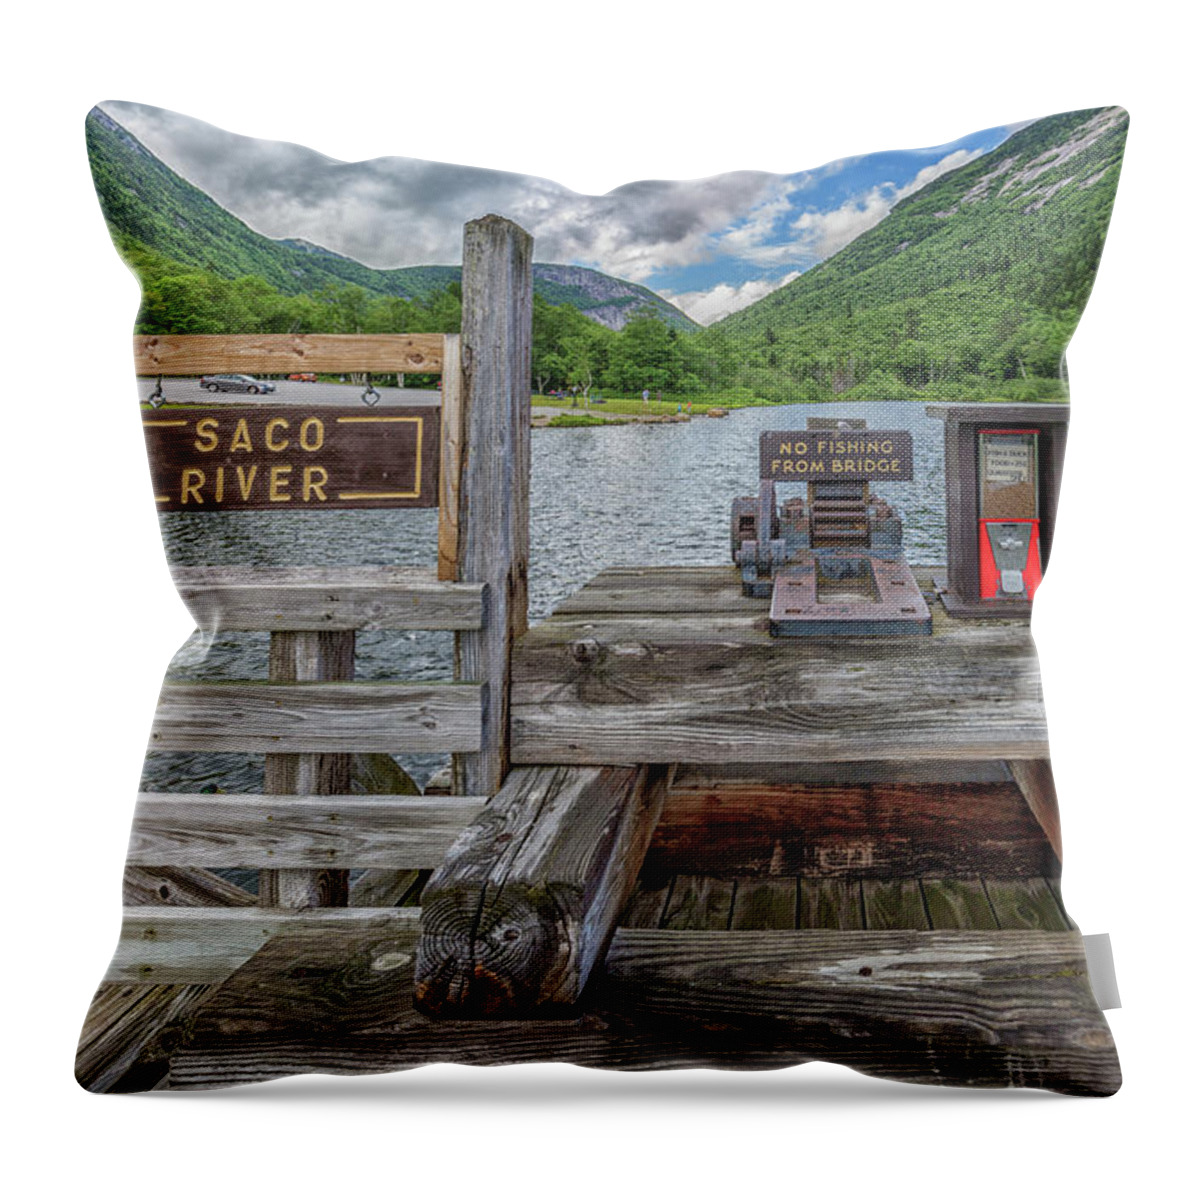 Saco River At Willey Pond Throw Pillow featuring the photograph Saco River at Willey Pond by Brian MacLean